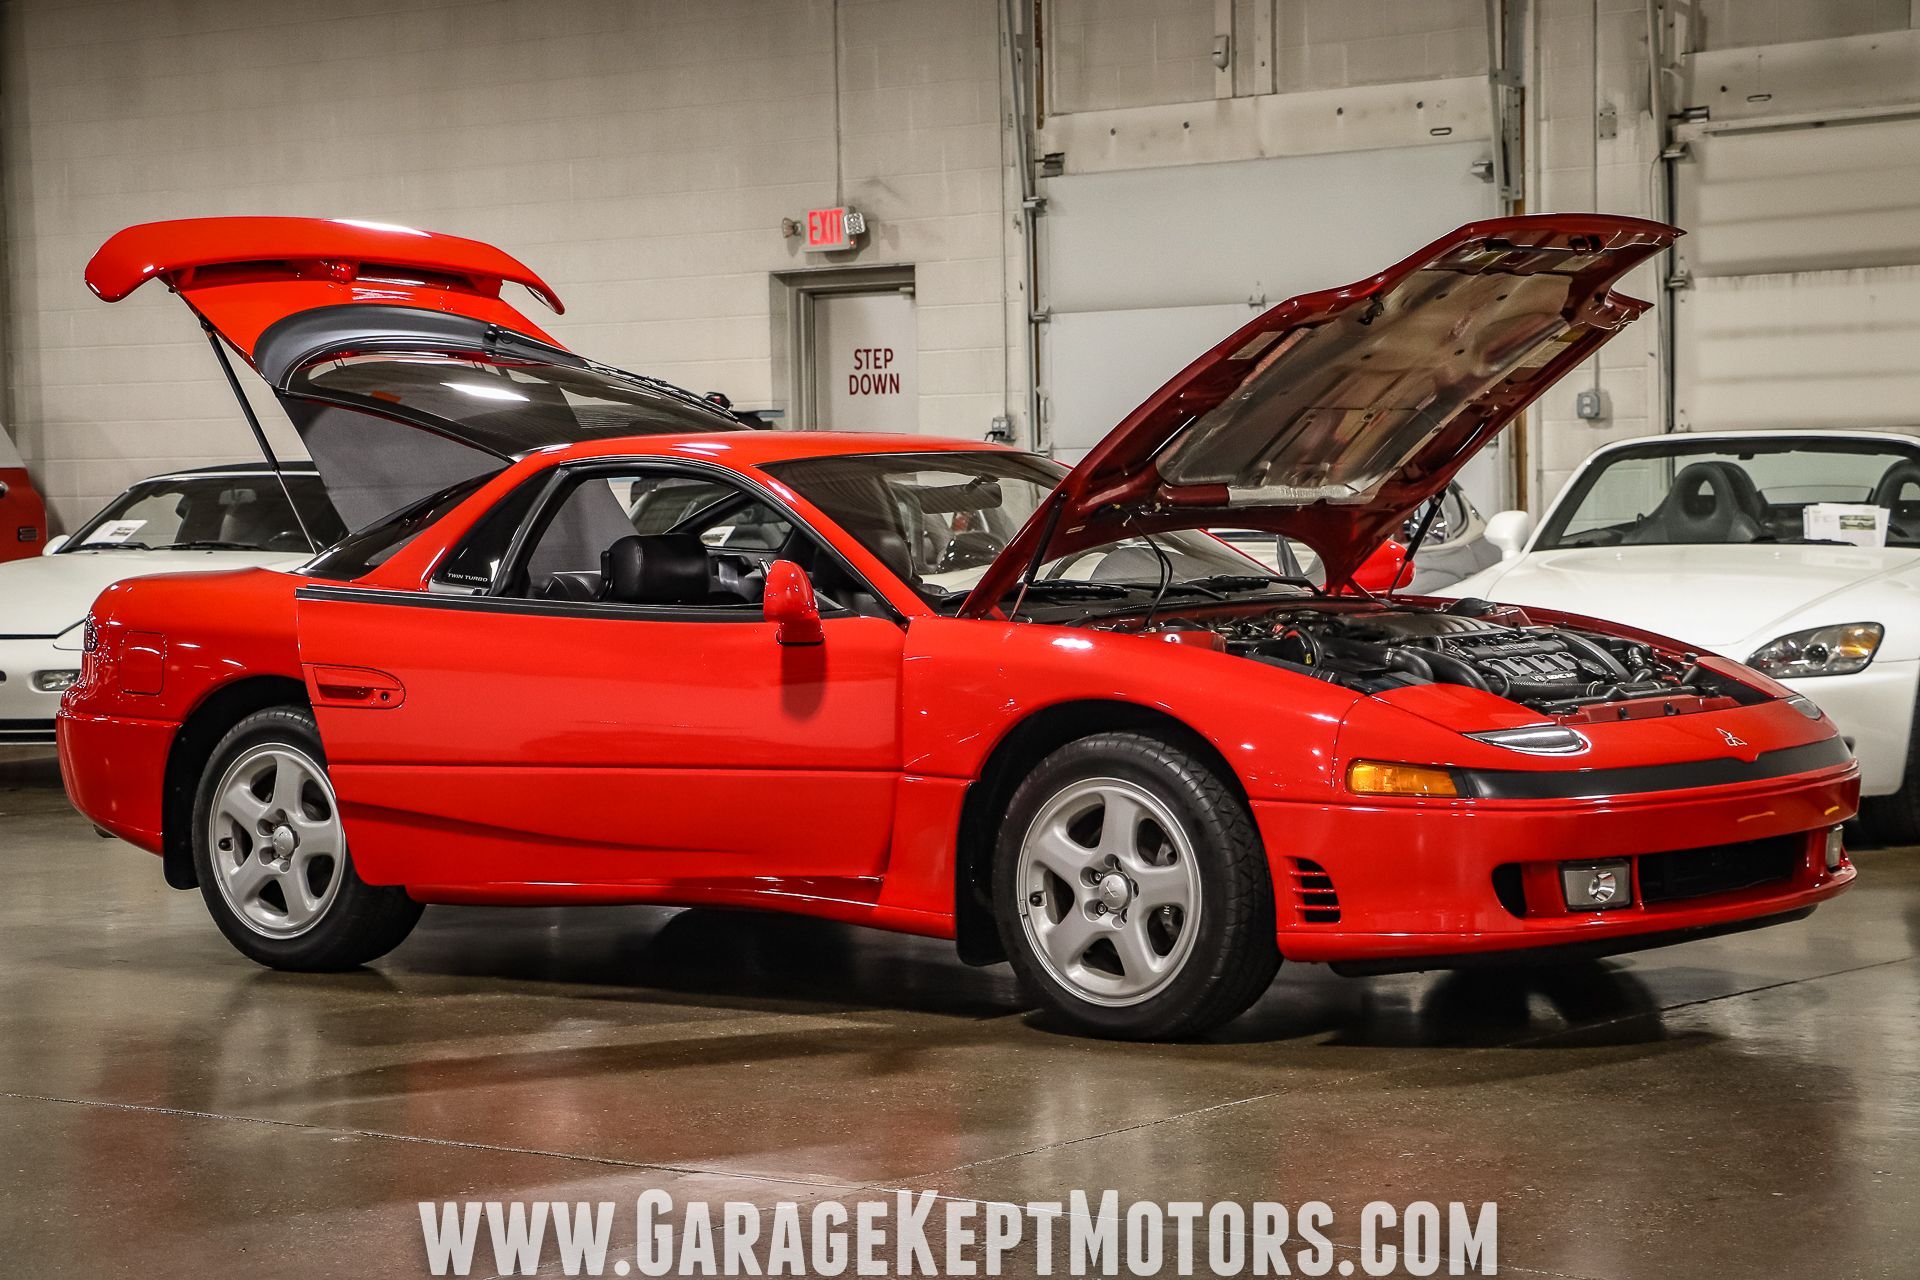 Low-Mile, One-Owner 1991 Mitsubishi 3000GT VR4 Might Turn Into Little  Summer Gem - autoevolution